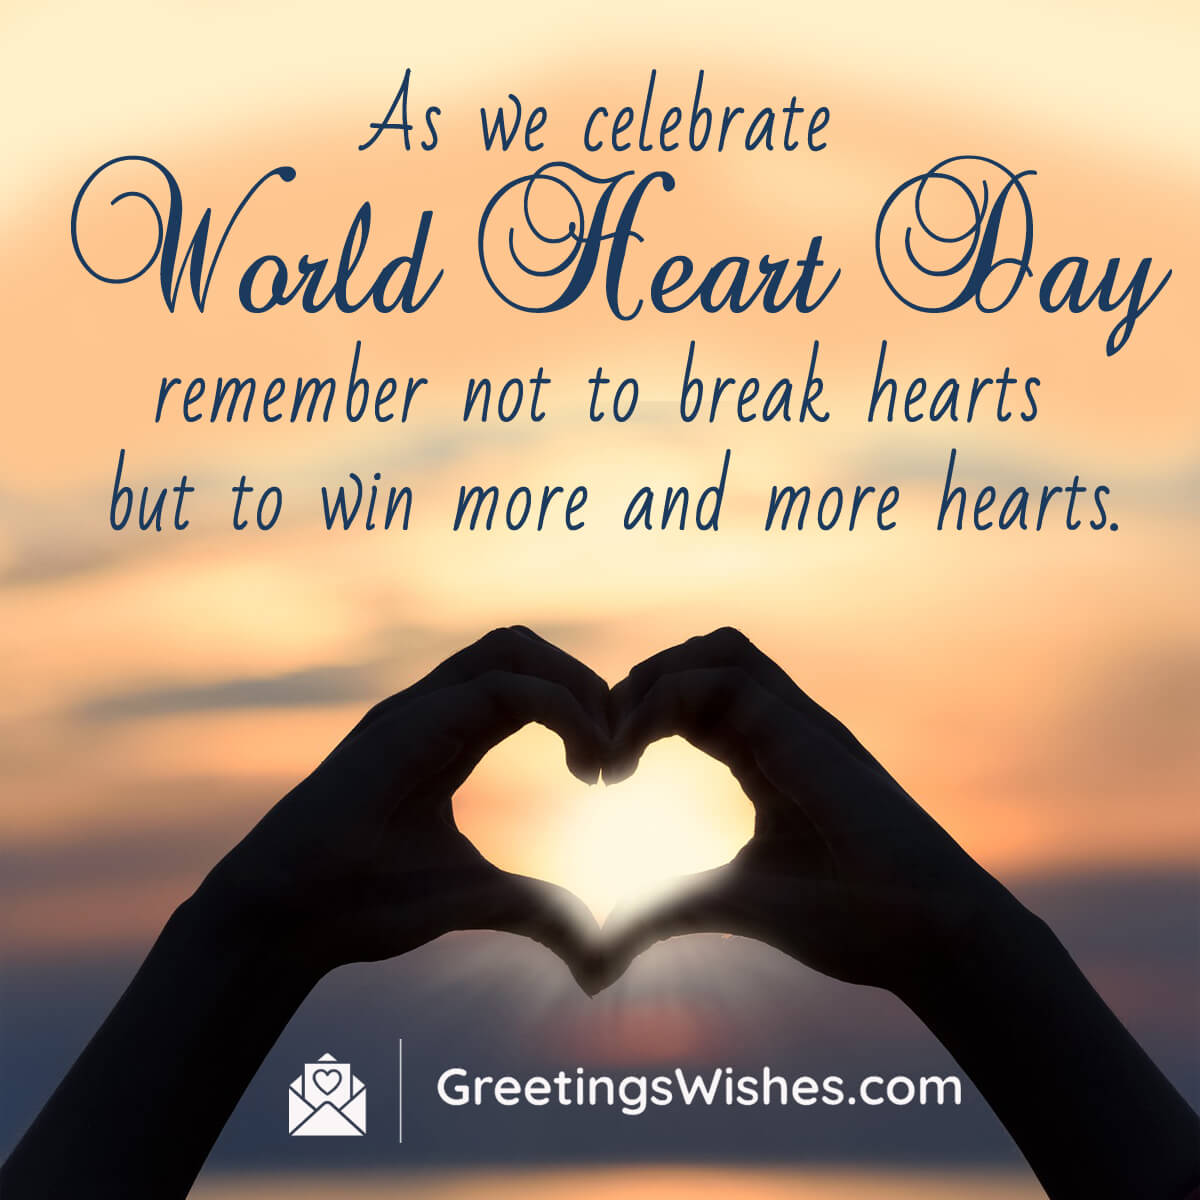 World Heart Day Wishes (29th September)